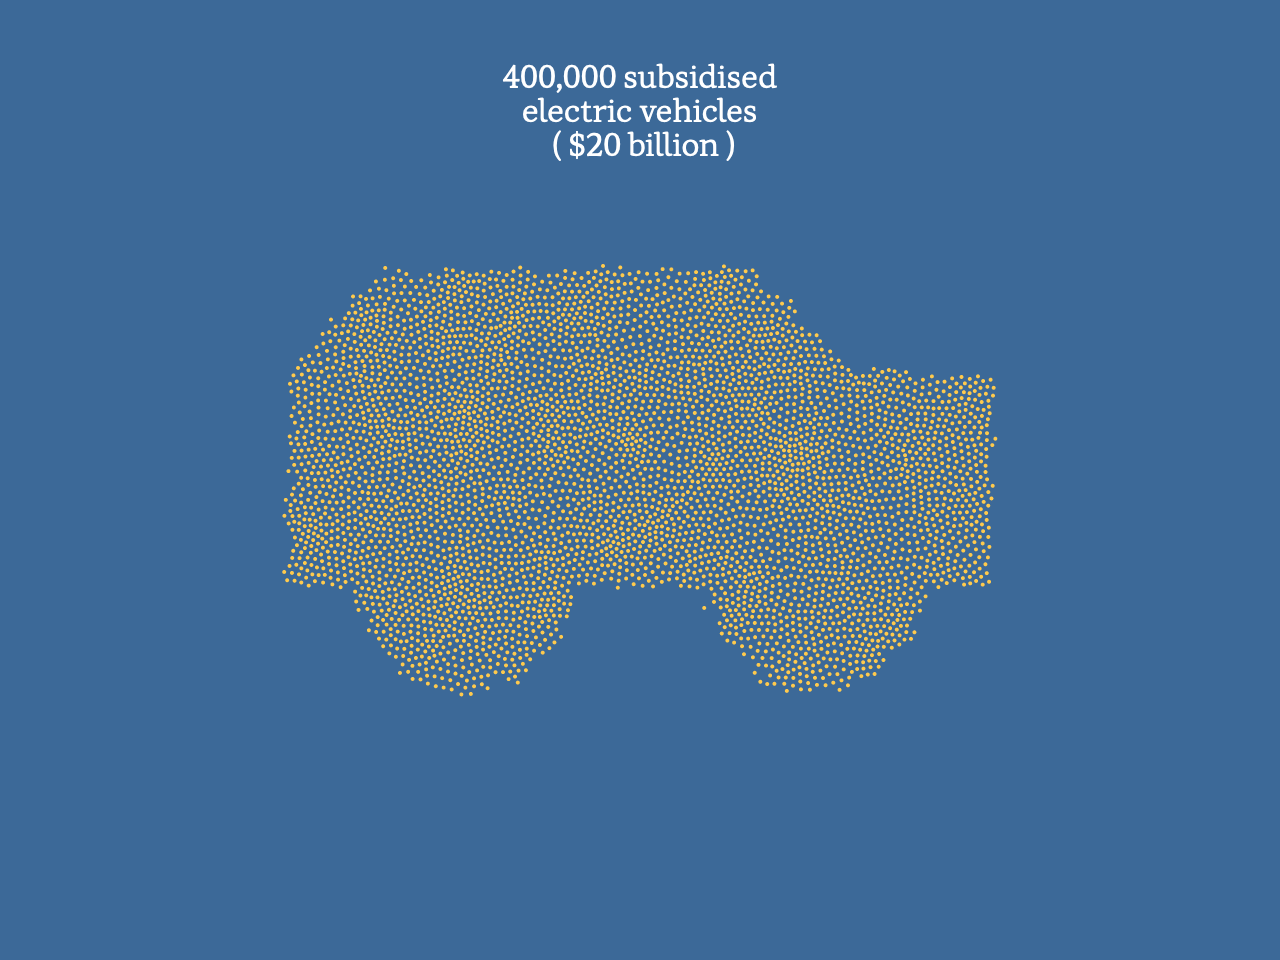 A graphic showing dots in the shape of a car, representing 400,000 subsidised electric vehicles.